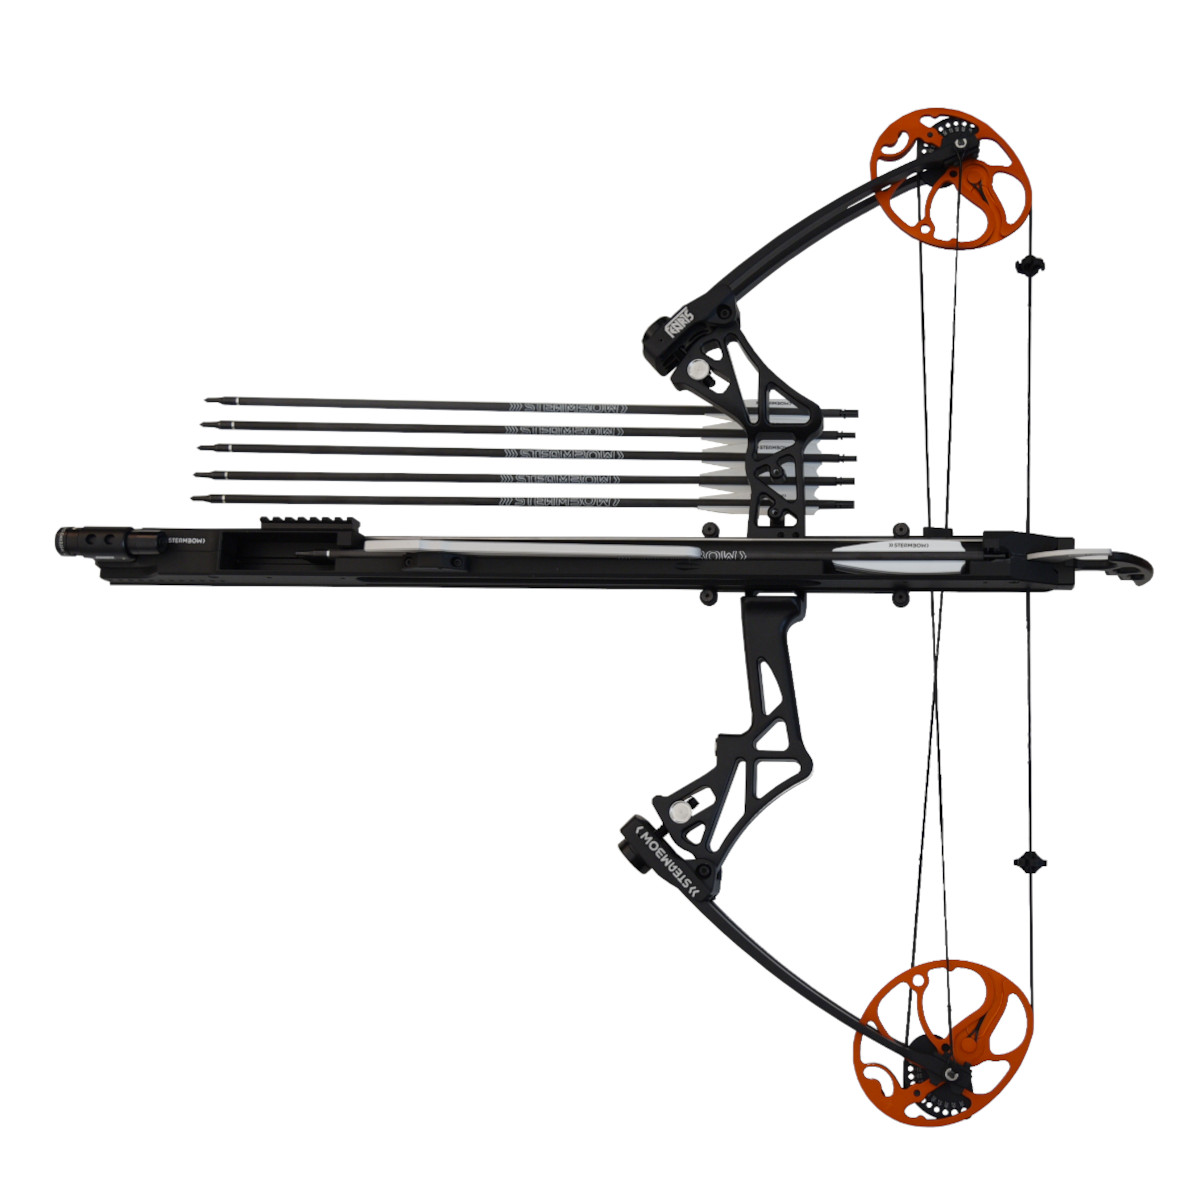 Steambow FENRIS – magazine with compound bow ”M1″ with red dot sight, orange cams